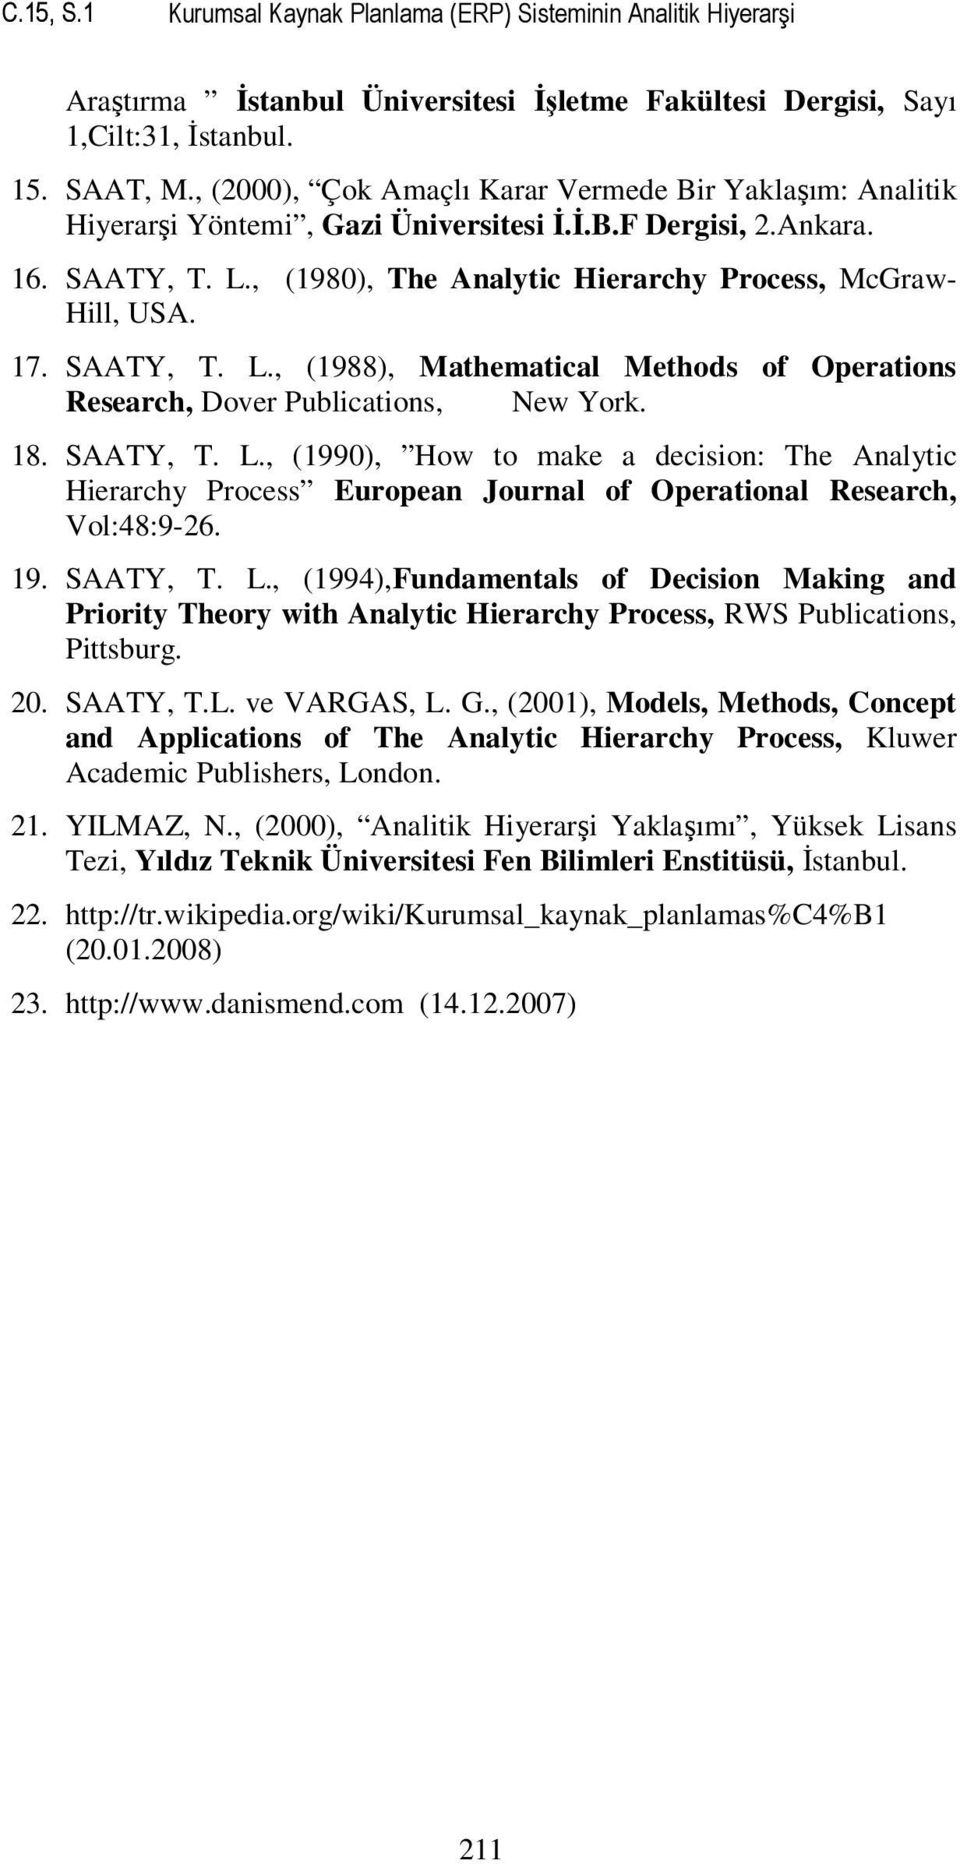 17. SAATY, T. L., (1988), Mathematical Methods of Operations Research, Dover Publications, New York. 18. SAATY, T. L., (1990), How to make a decision: The Analytic Hierarchy Process European Journal of Operational Research, Vol:48:9-26.